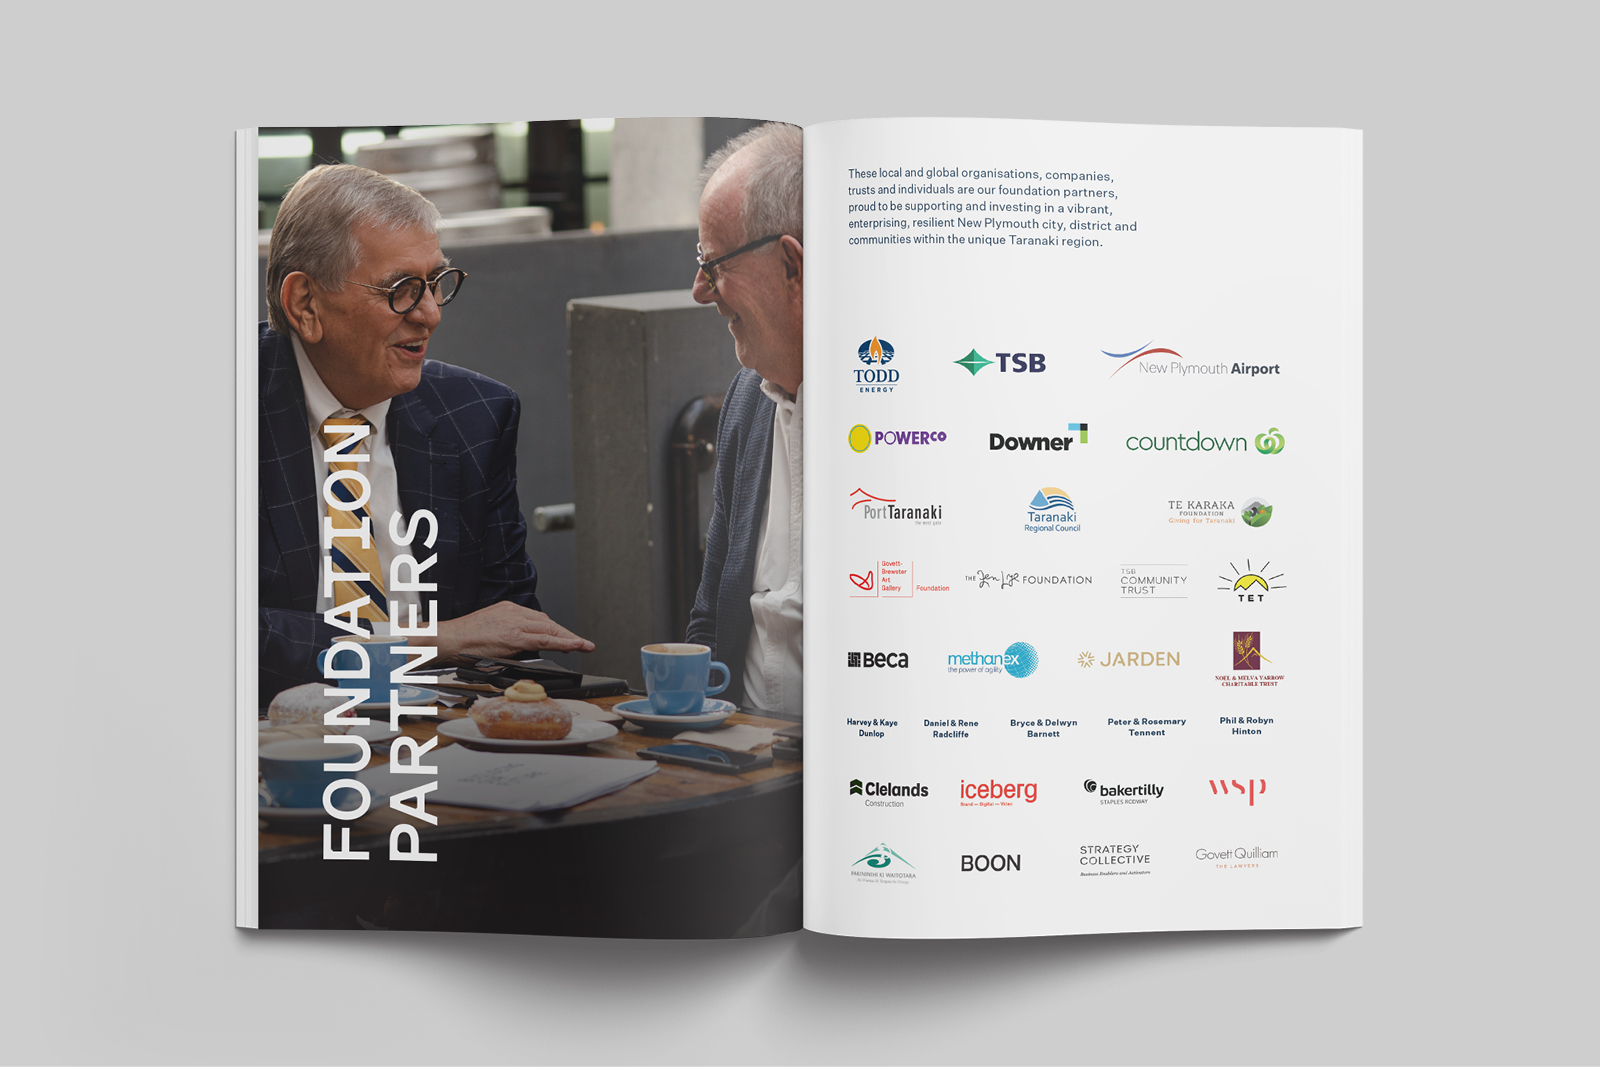 Open pages featuring the logos of the foundation partners